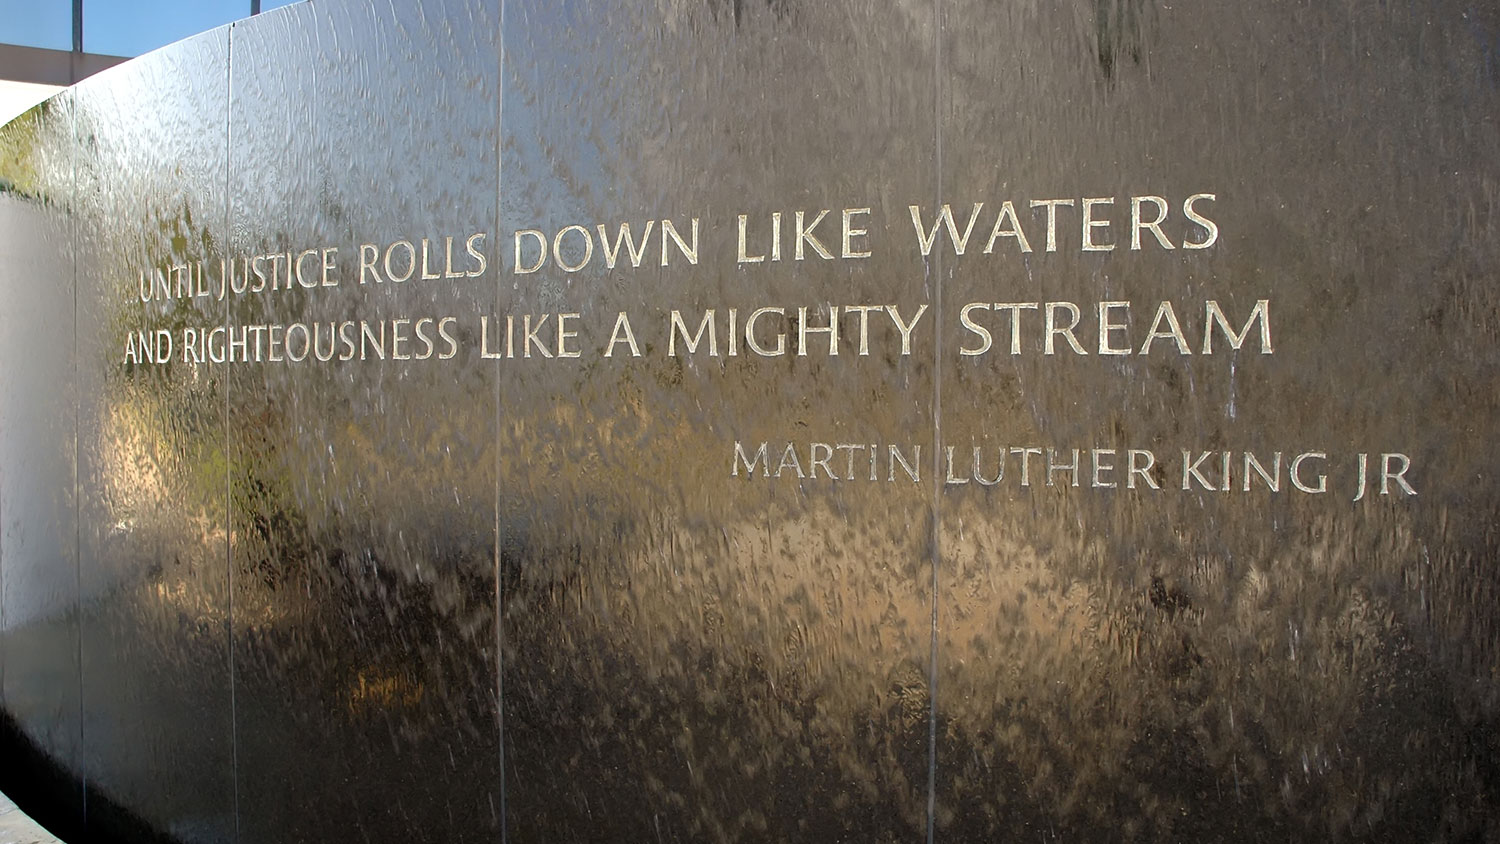 A Martin Luther King quote